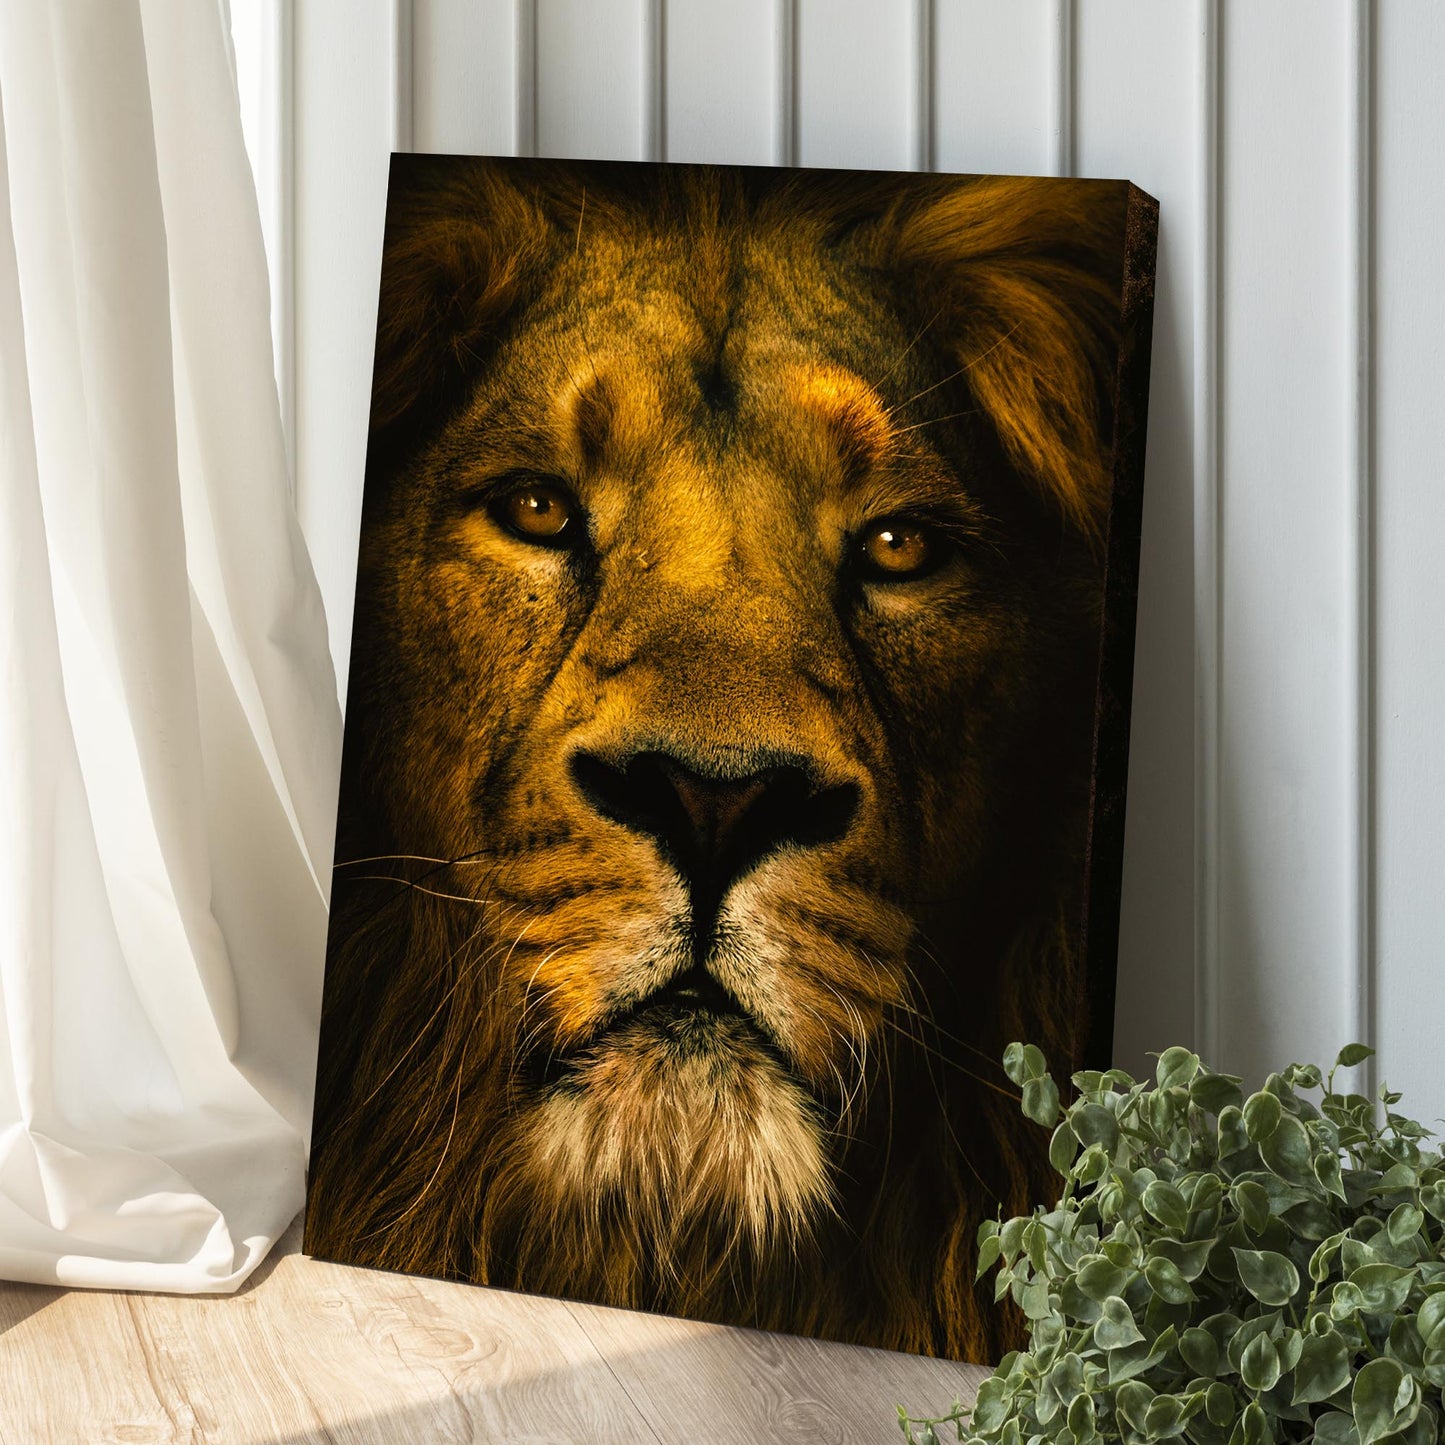 Golden Lion King Portrait Canvas Wall Art Style 2 - Image by Tailored Canvases